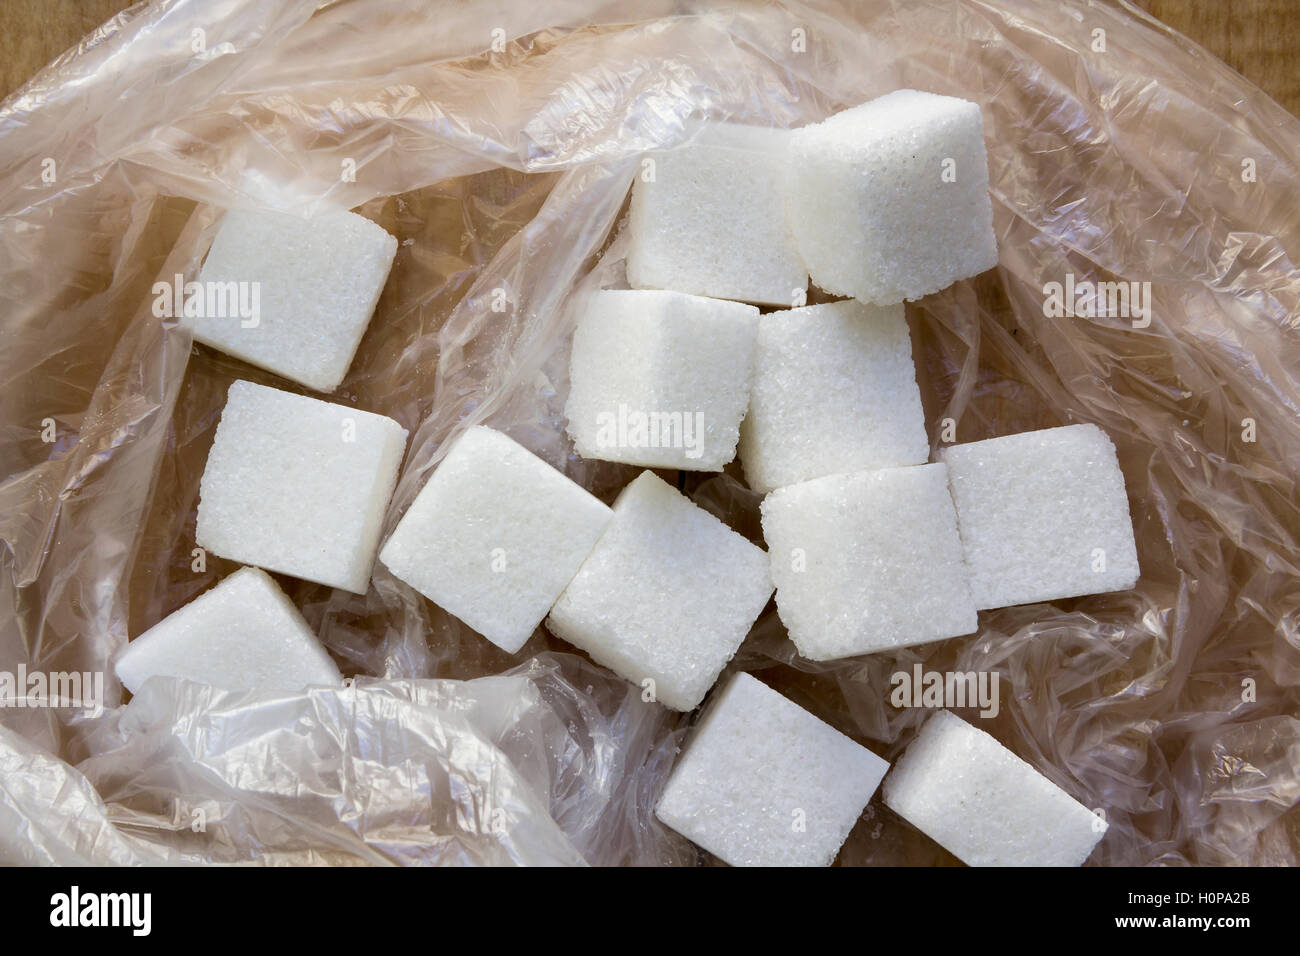 White sugar pieces in a plastic bag on a wooden background. Stock Photo